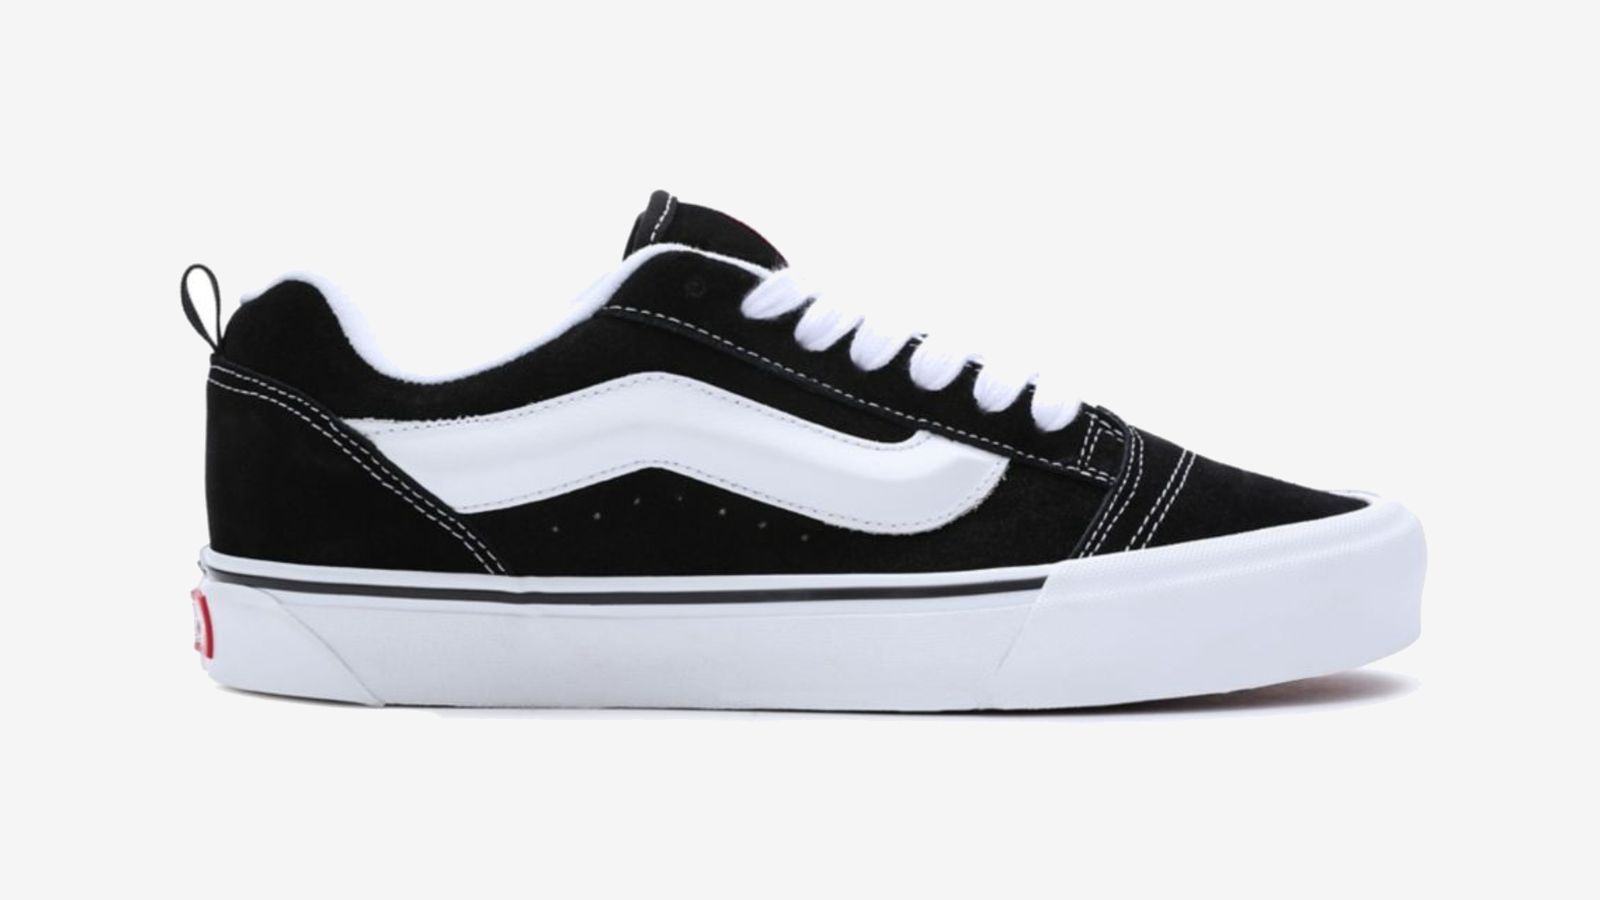 Vans Knu Skool "Black White" product image of a black Van low-top featuring oversized white details and midsole.